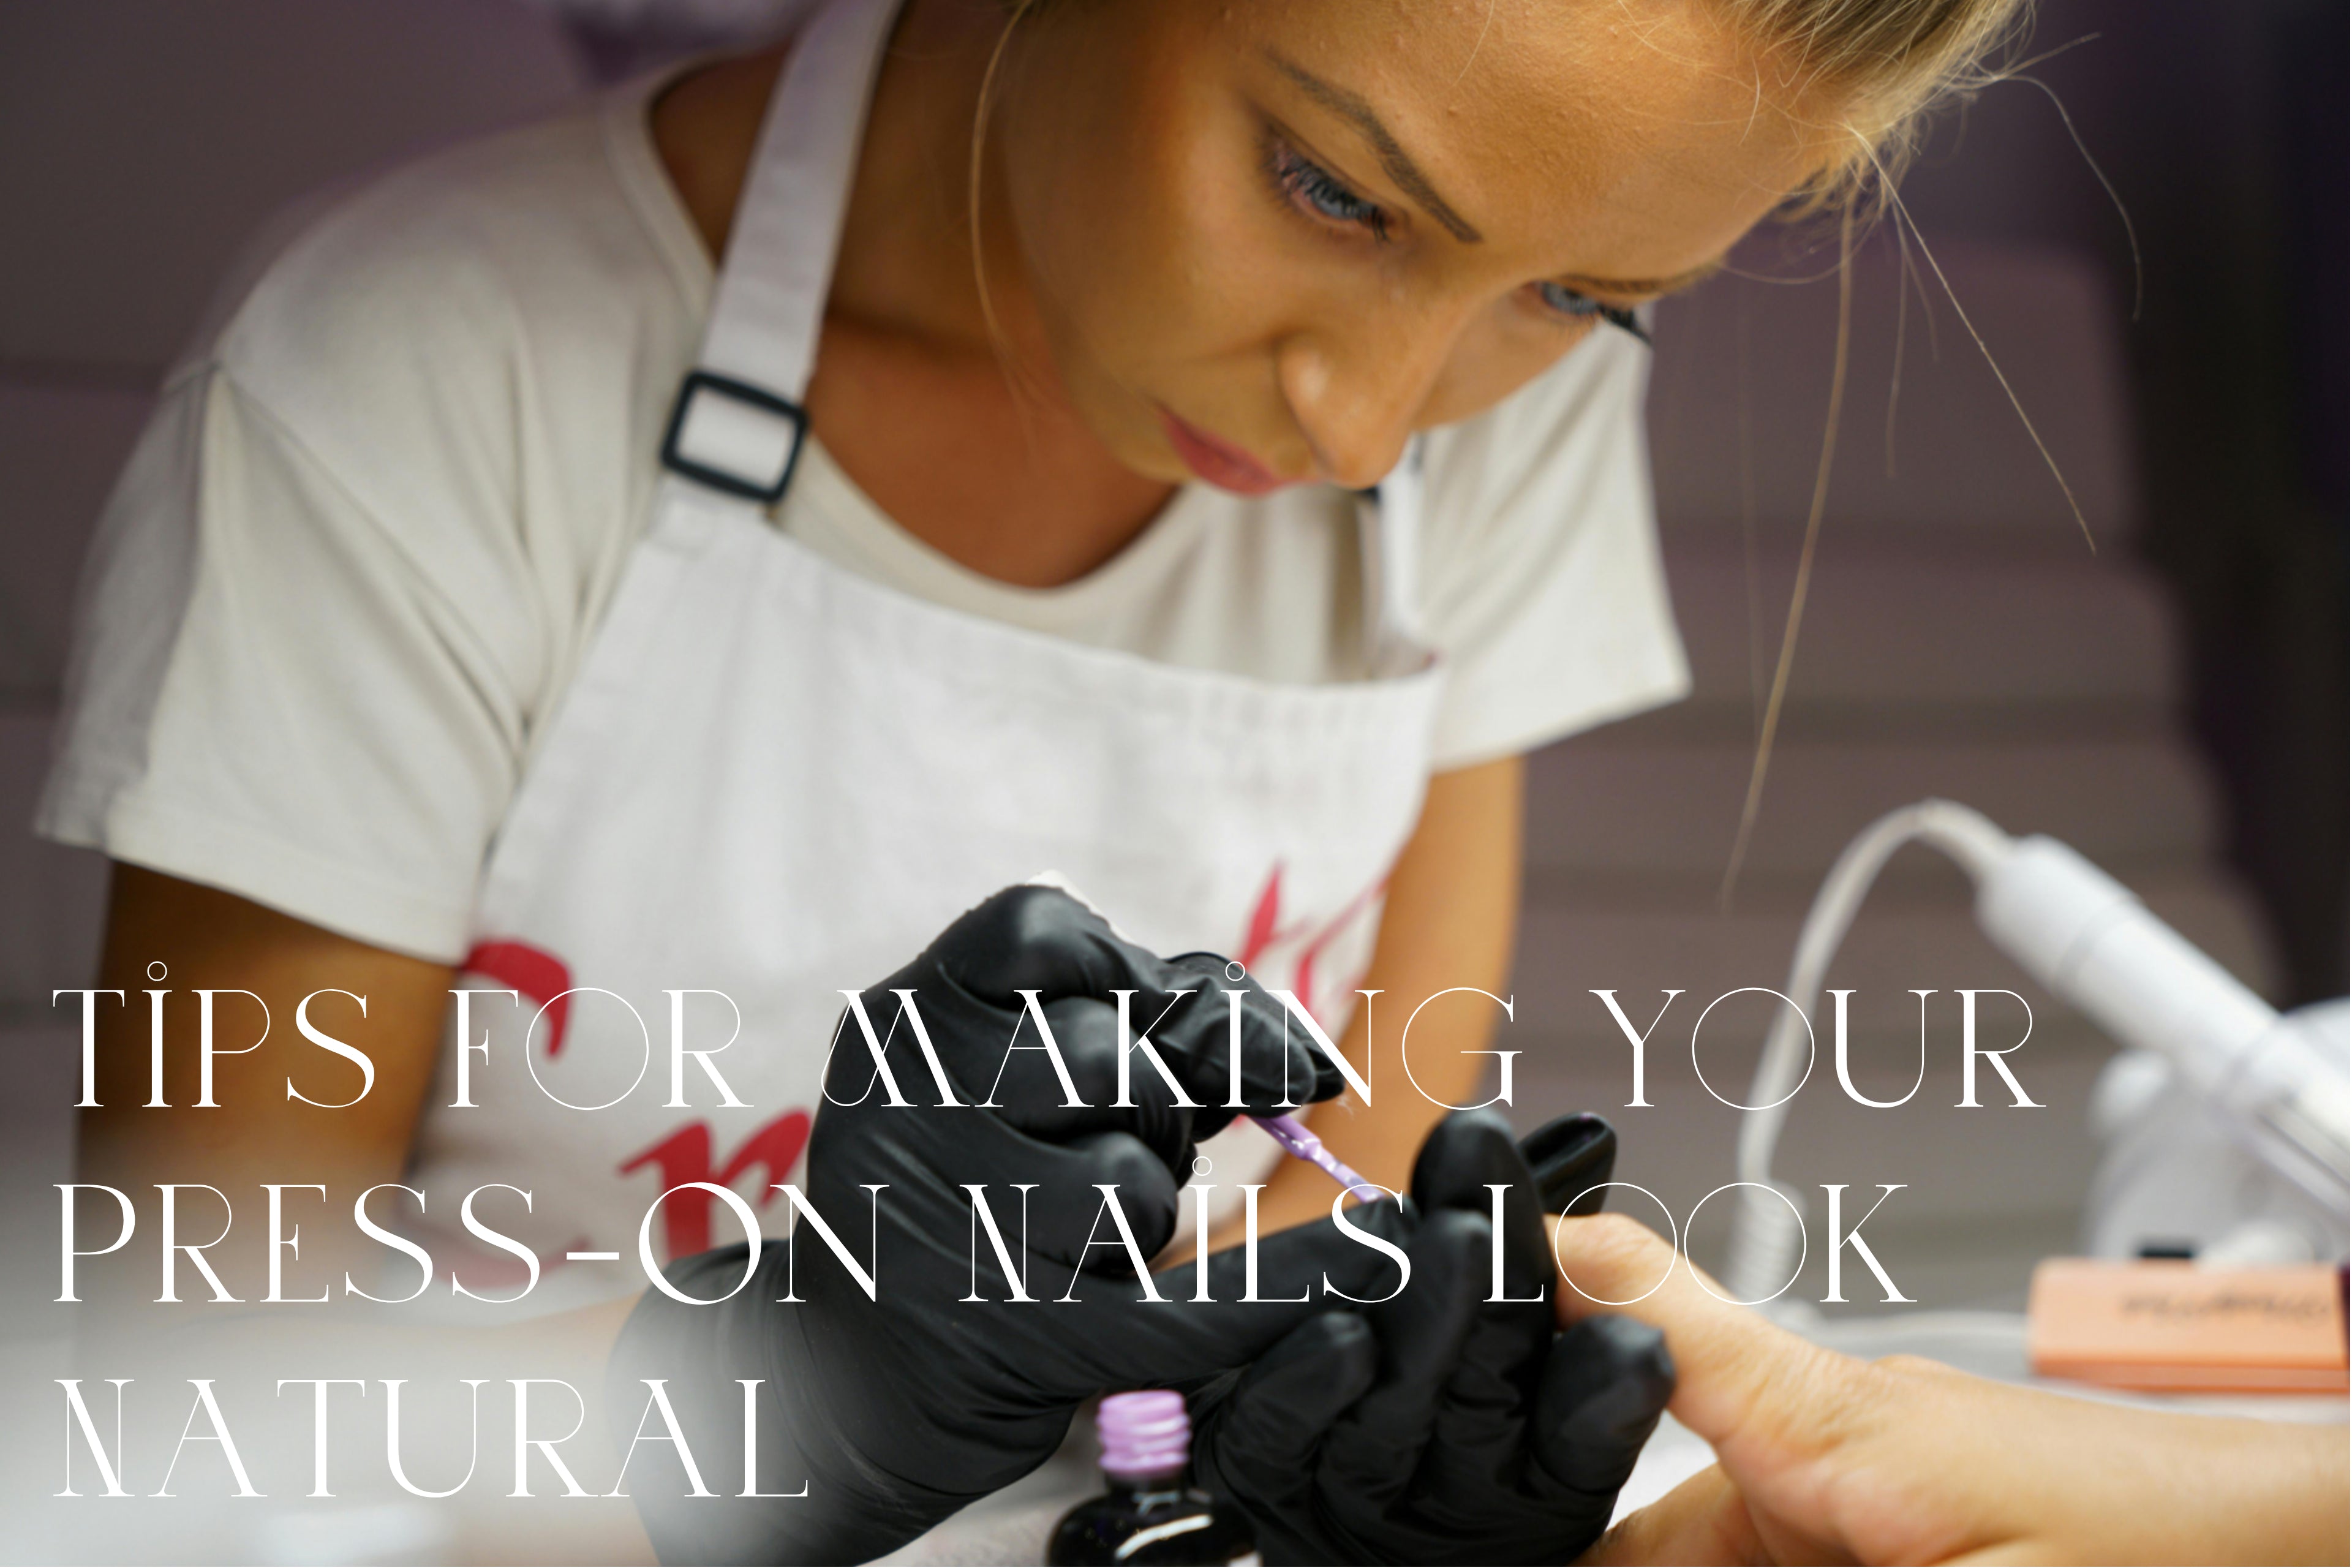 Tips for Making Your Press-On Nails Look Natural